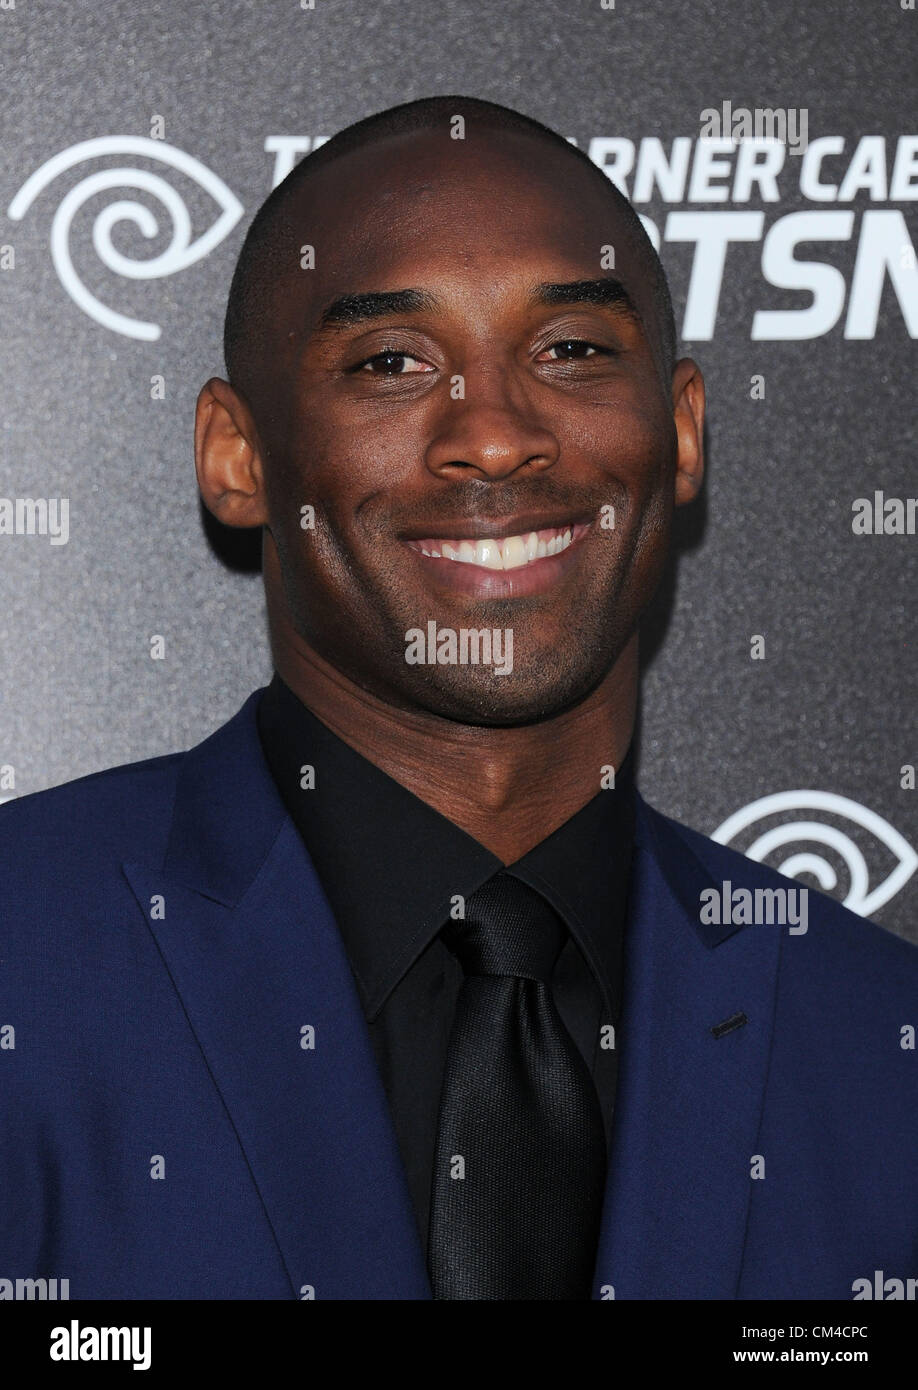 Kobe Bryant arrives at the Time Warner cable sports TV channel launch in El Segundo, CA. 1st Oct 2012. USA. Stock Photo